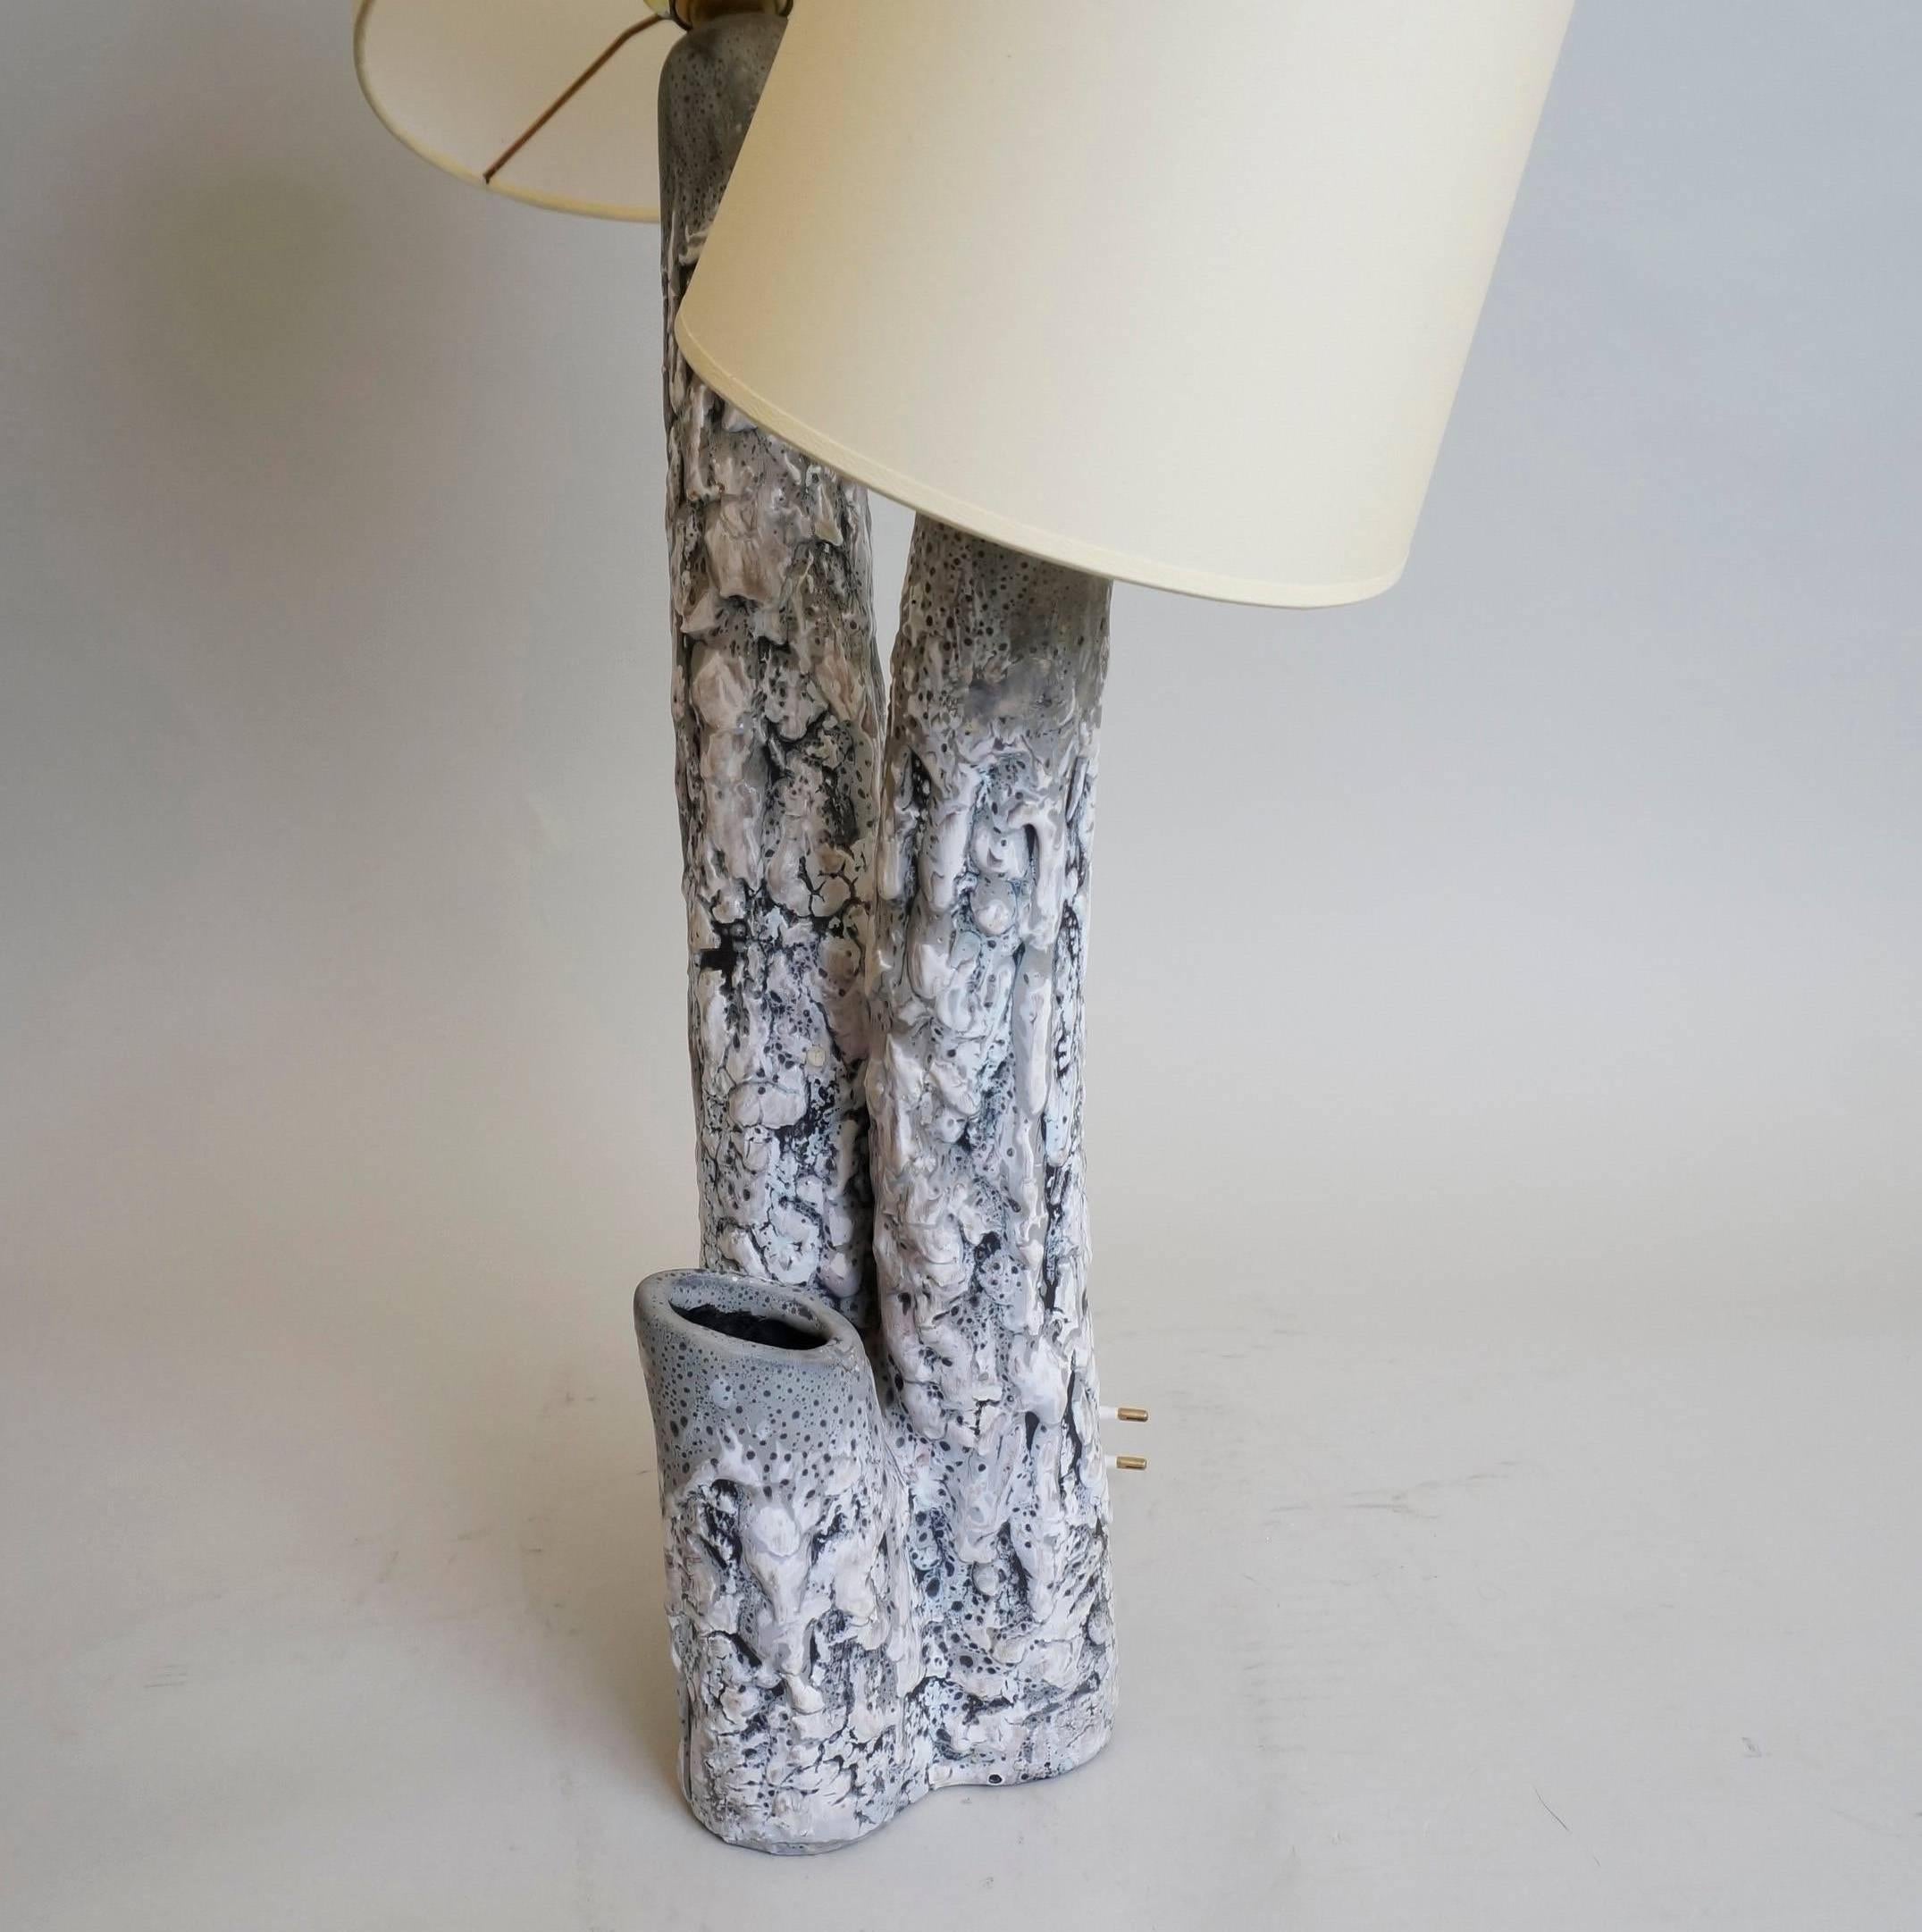 Enameled ceramic table lamp by Louis Giraud à Vallauris
Signed on the back
custom made fabric lampshades.
Rewired with twisted silk cord.

Measures: Ceramic 43 cm-16.9 in.
Height with lampshade 60 cm-23.6 in.